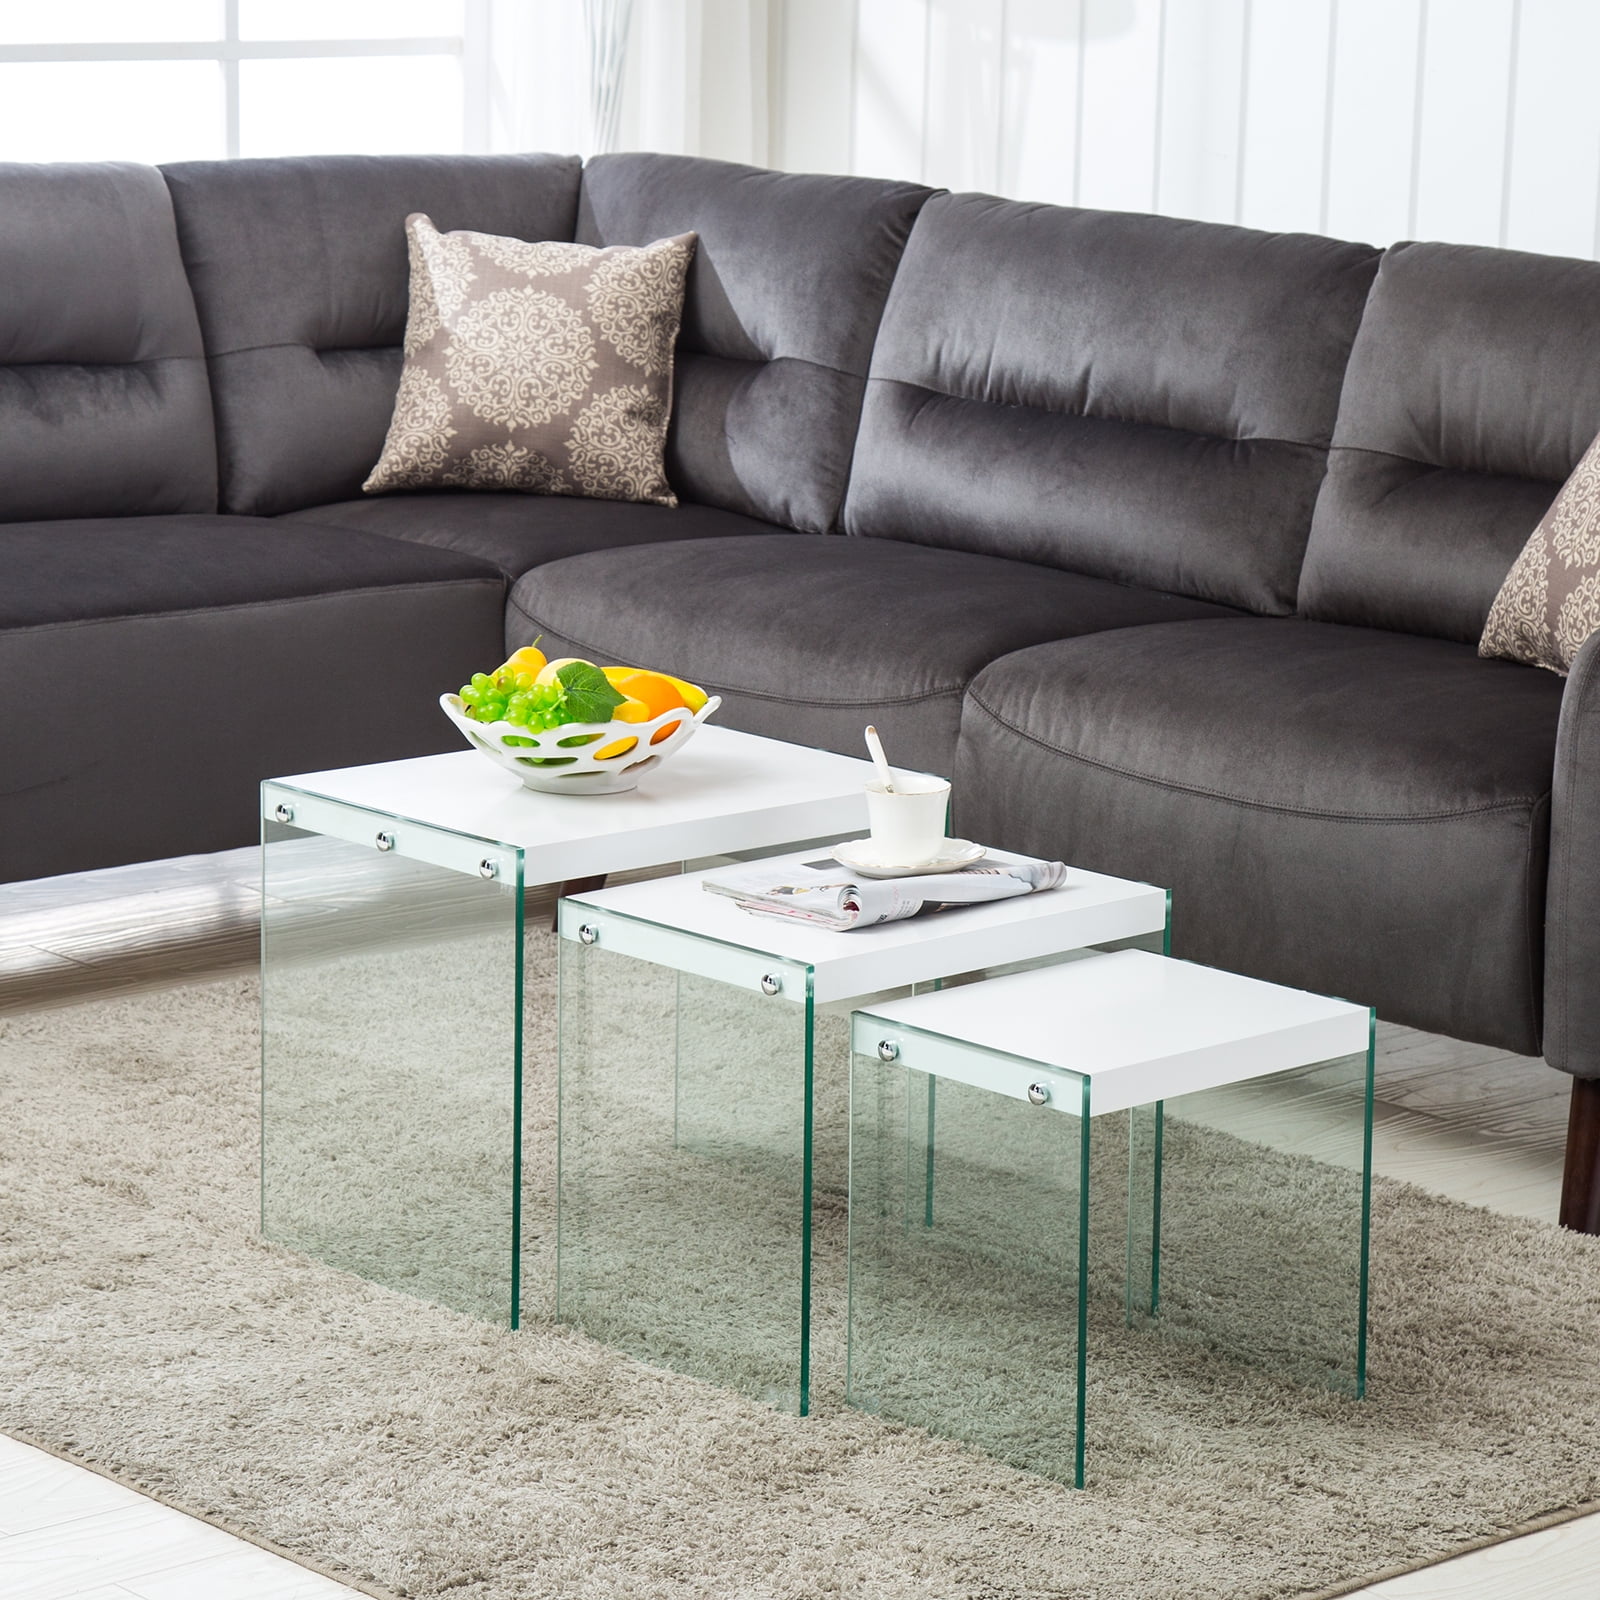 New Modern Nest of 3 White Coffee Table Side /End Table Living Room